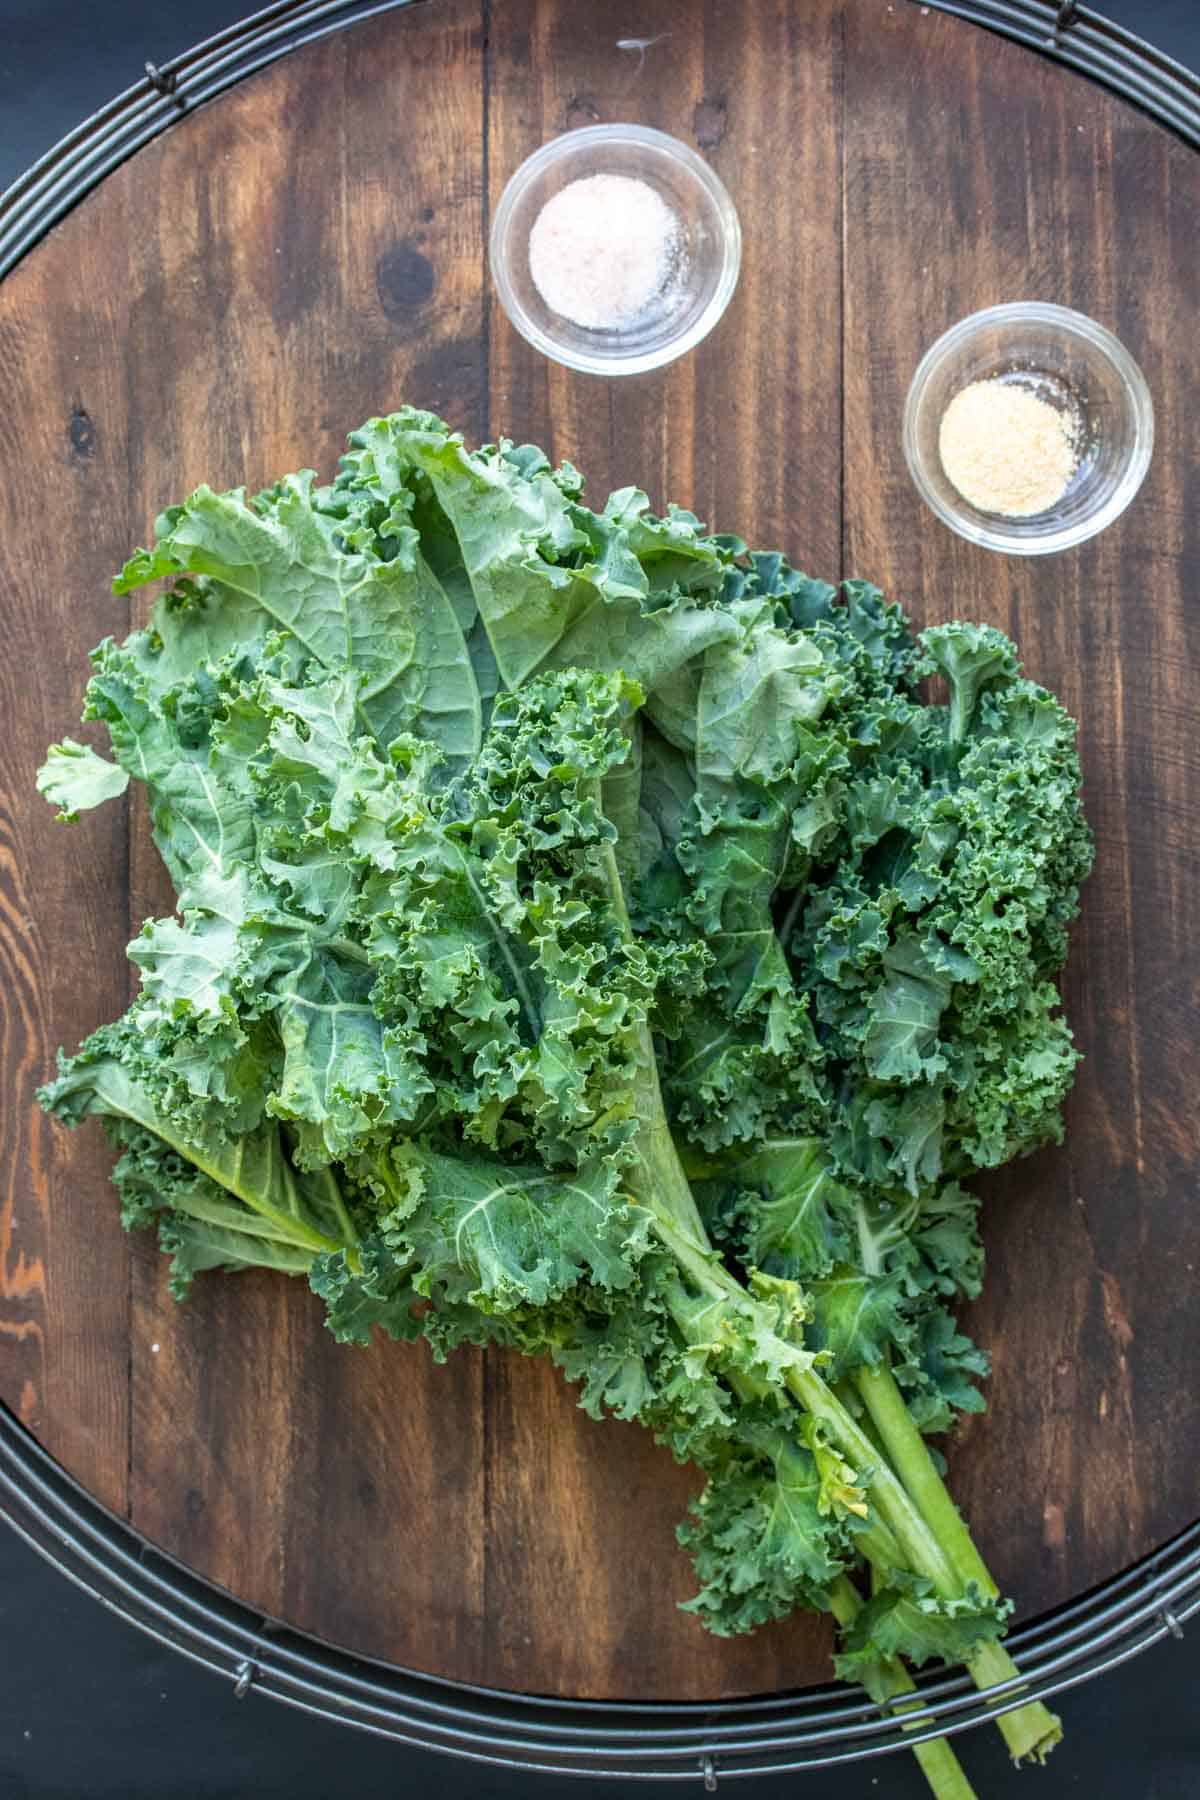 Wooden surface with a bunch of kale and little bowls of salt and garlic powder